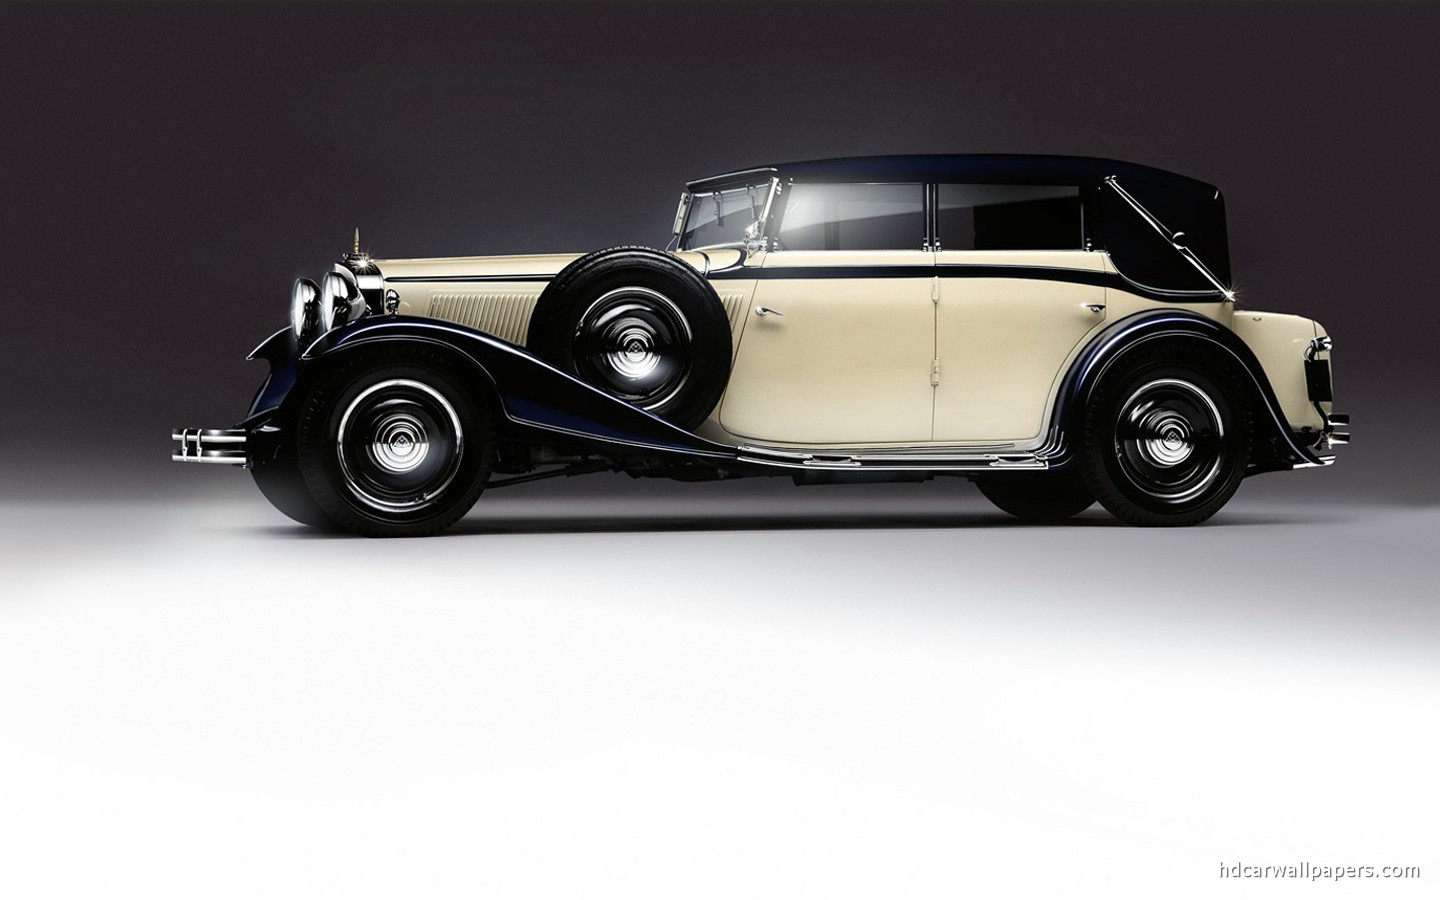 This Is Also Classic Car Wallpaper Has White And Black